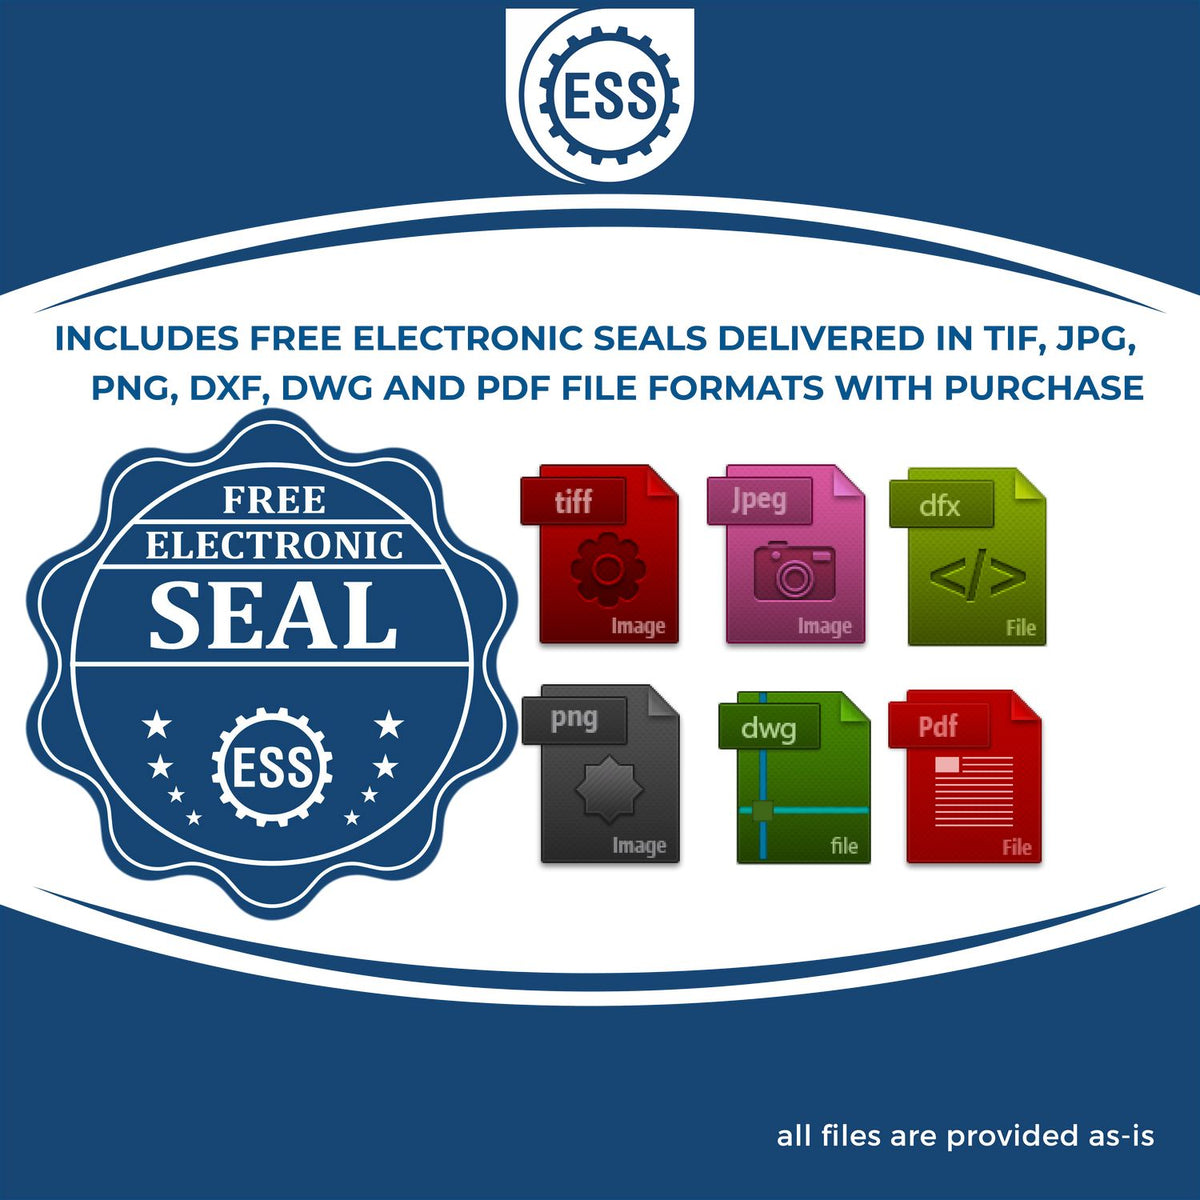 An infographic for the free electronic seal for the Heavy Duty Cast Iron Montana Engineer Seal Embosser illustrating the different file type icons such as DXF, DWG, TIF, JPG and PNG.